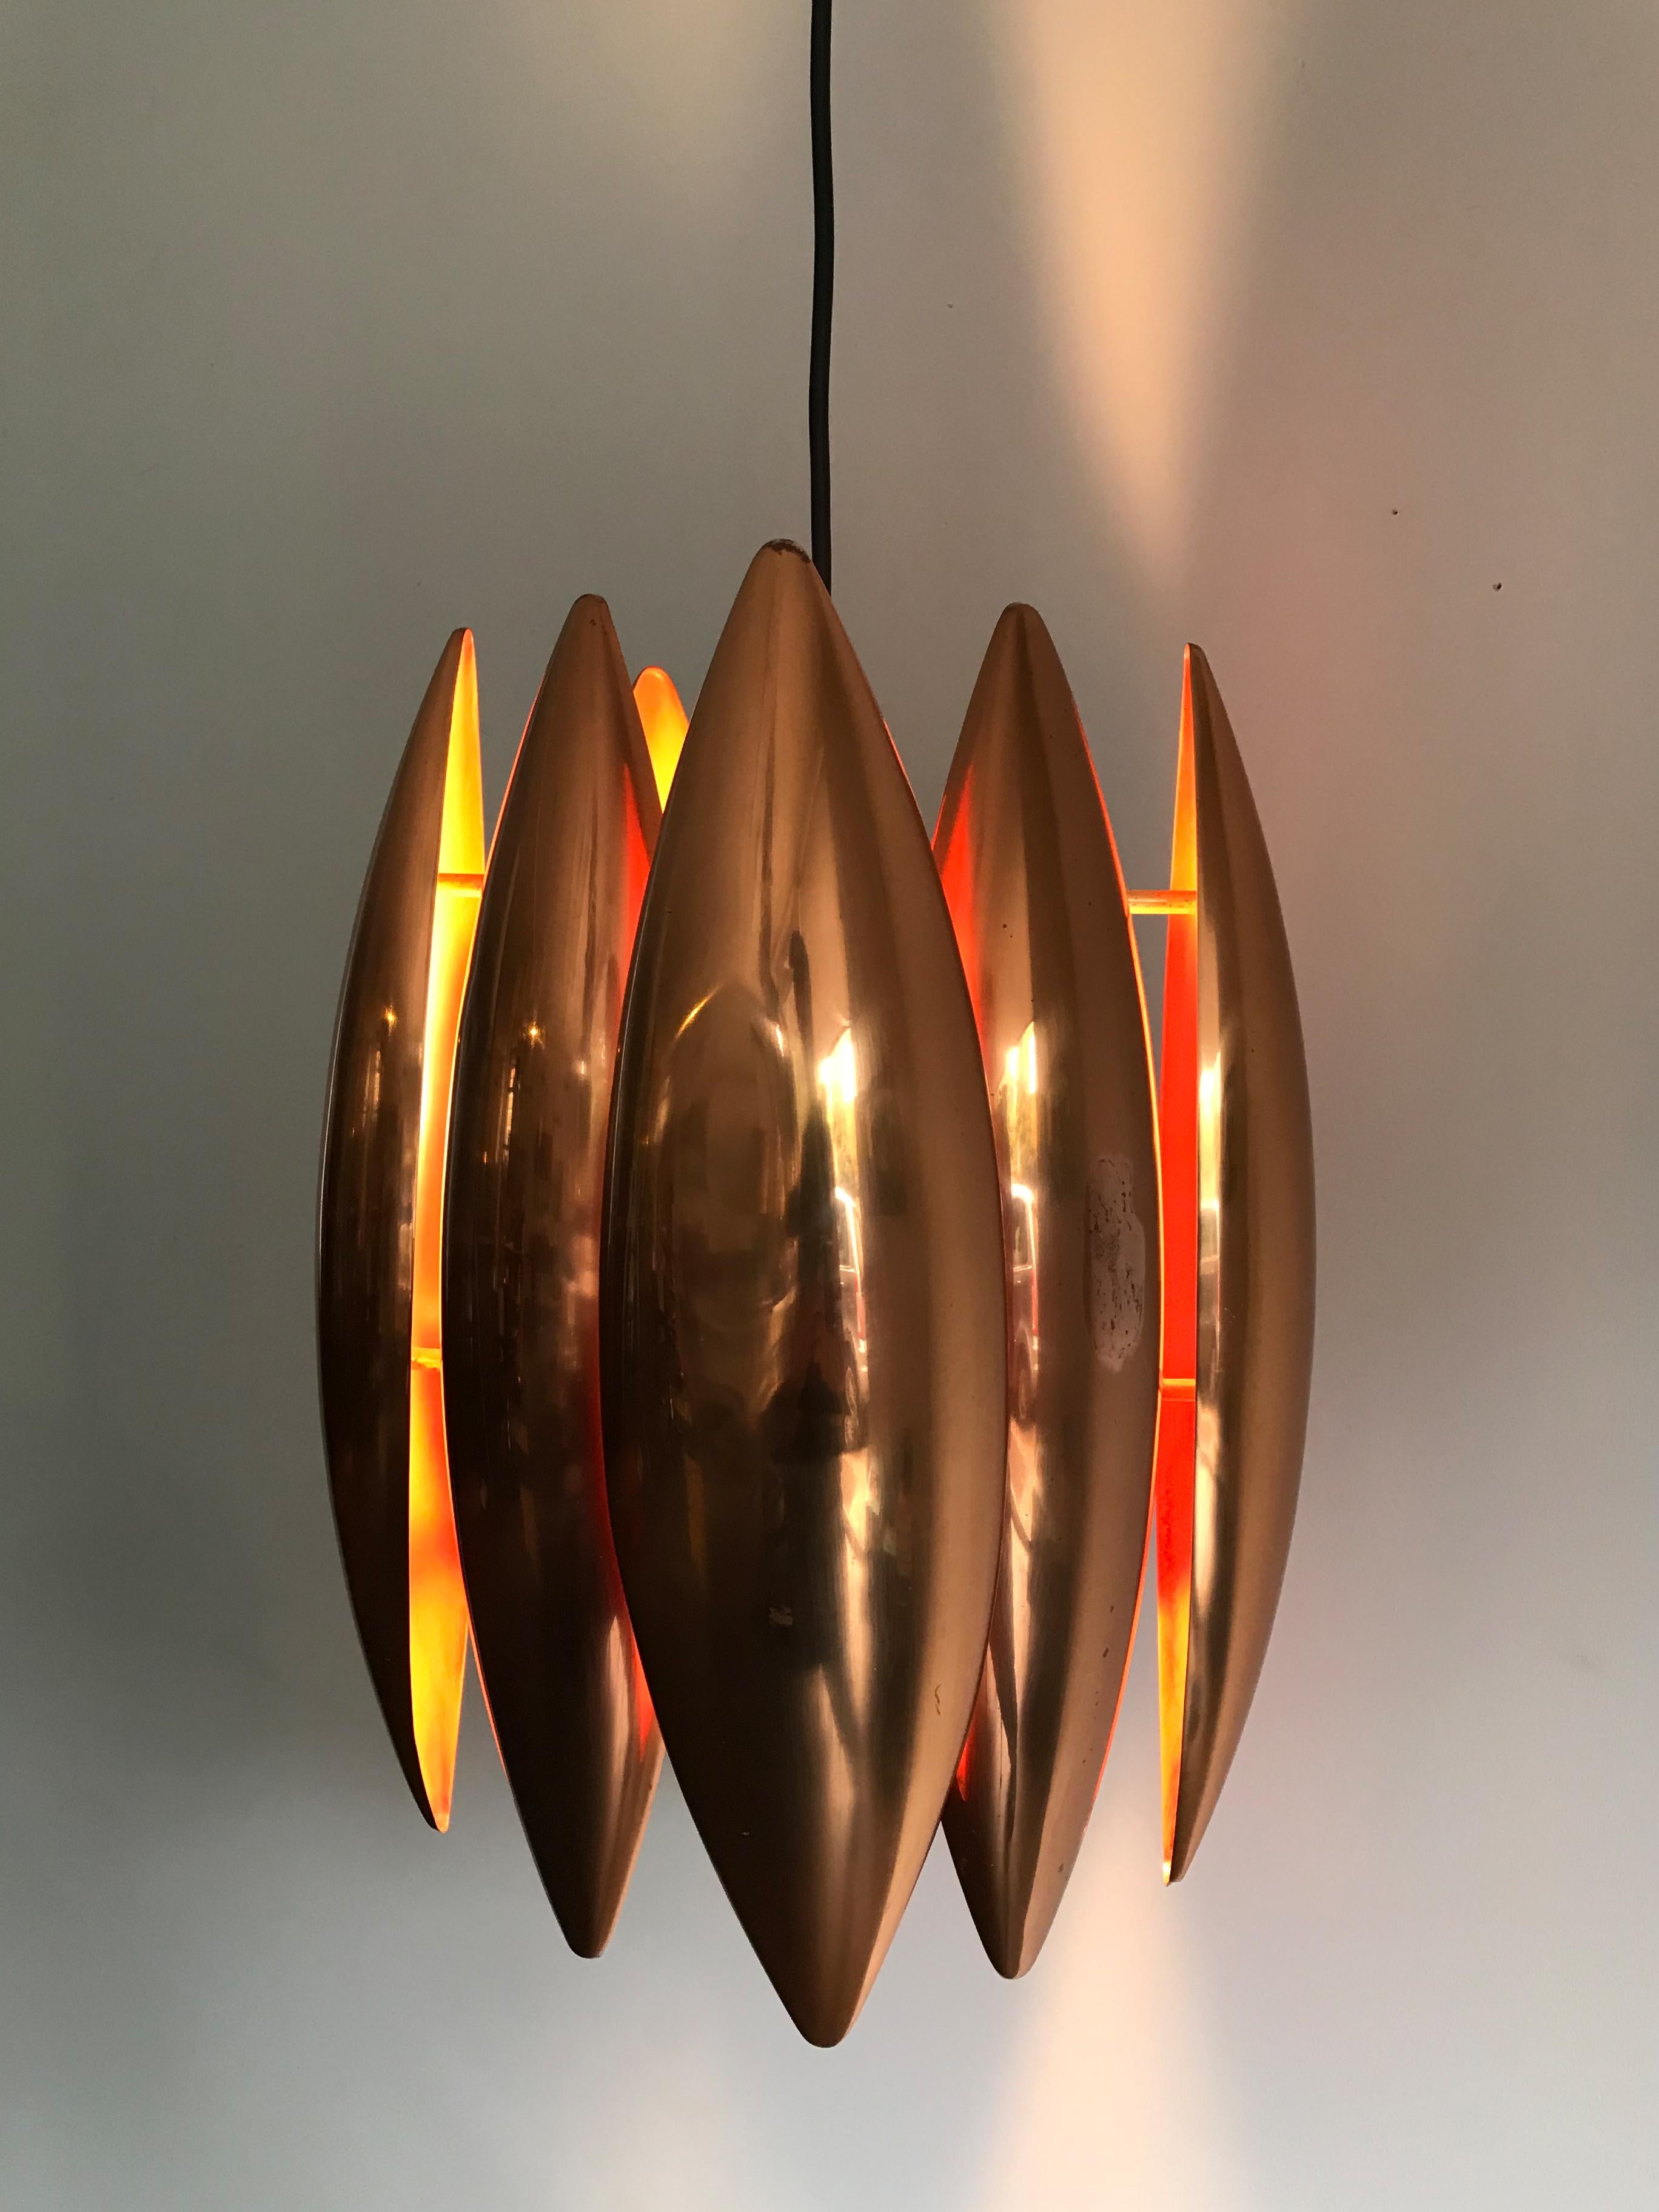 1960s amazing and very rare copper Scandinavian pendant lamp model Kastor designed by Jo Hammerborg for Fog & Morup, made in Denmark.
Source: Fog & Morup catalogue 1969.

When the lamp is on it diffuses a very warm, sophisticated and welcoming